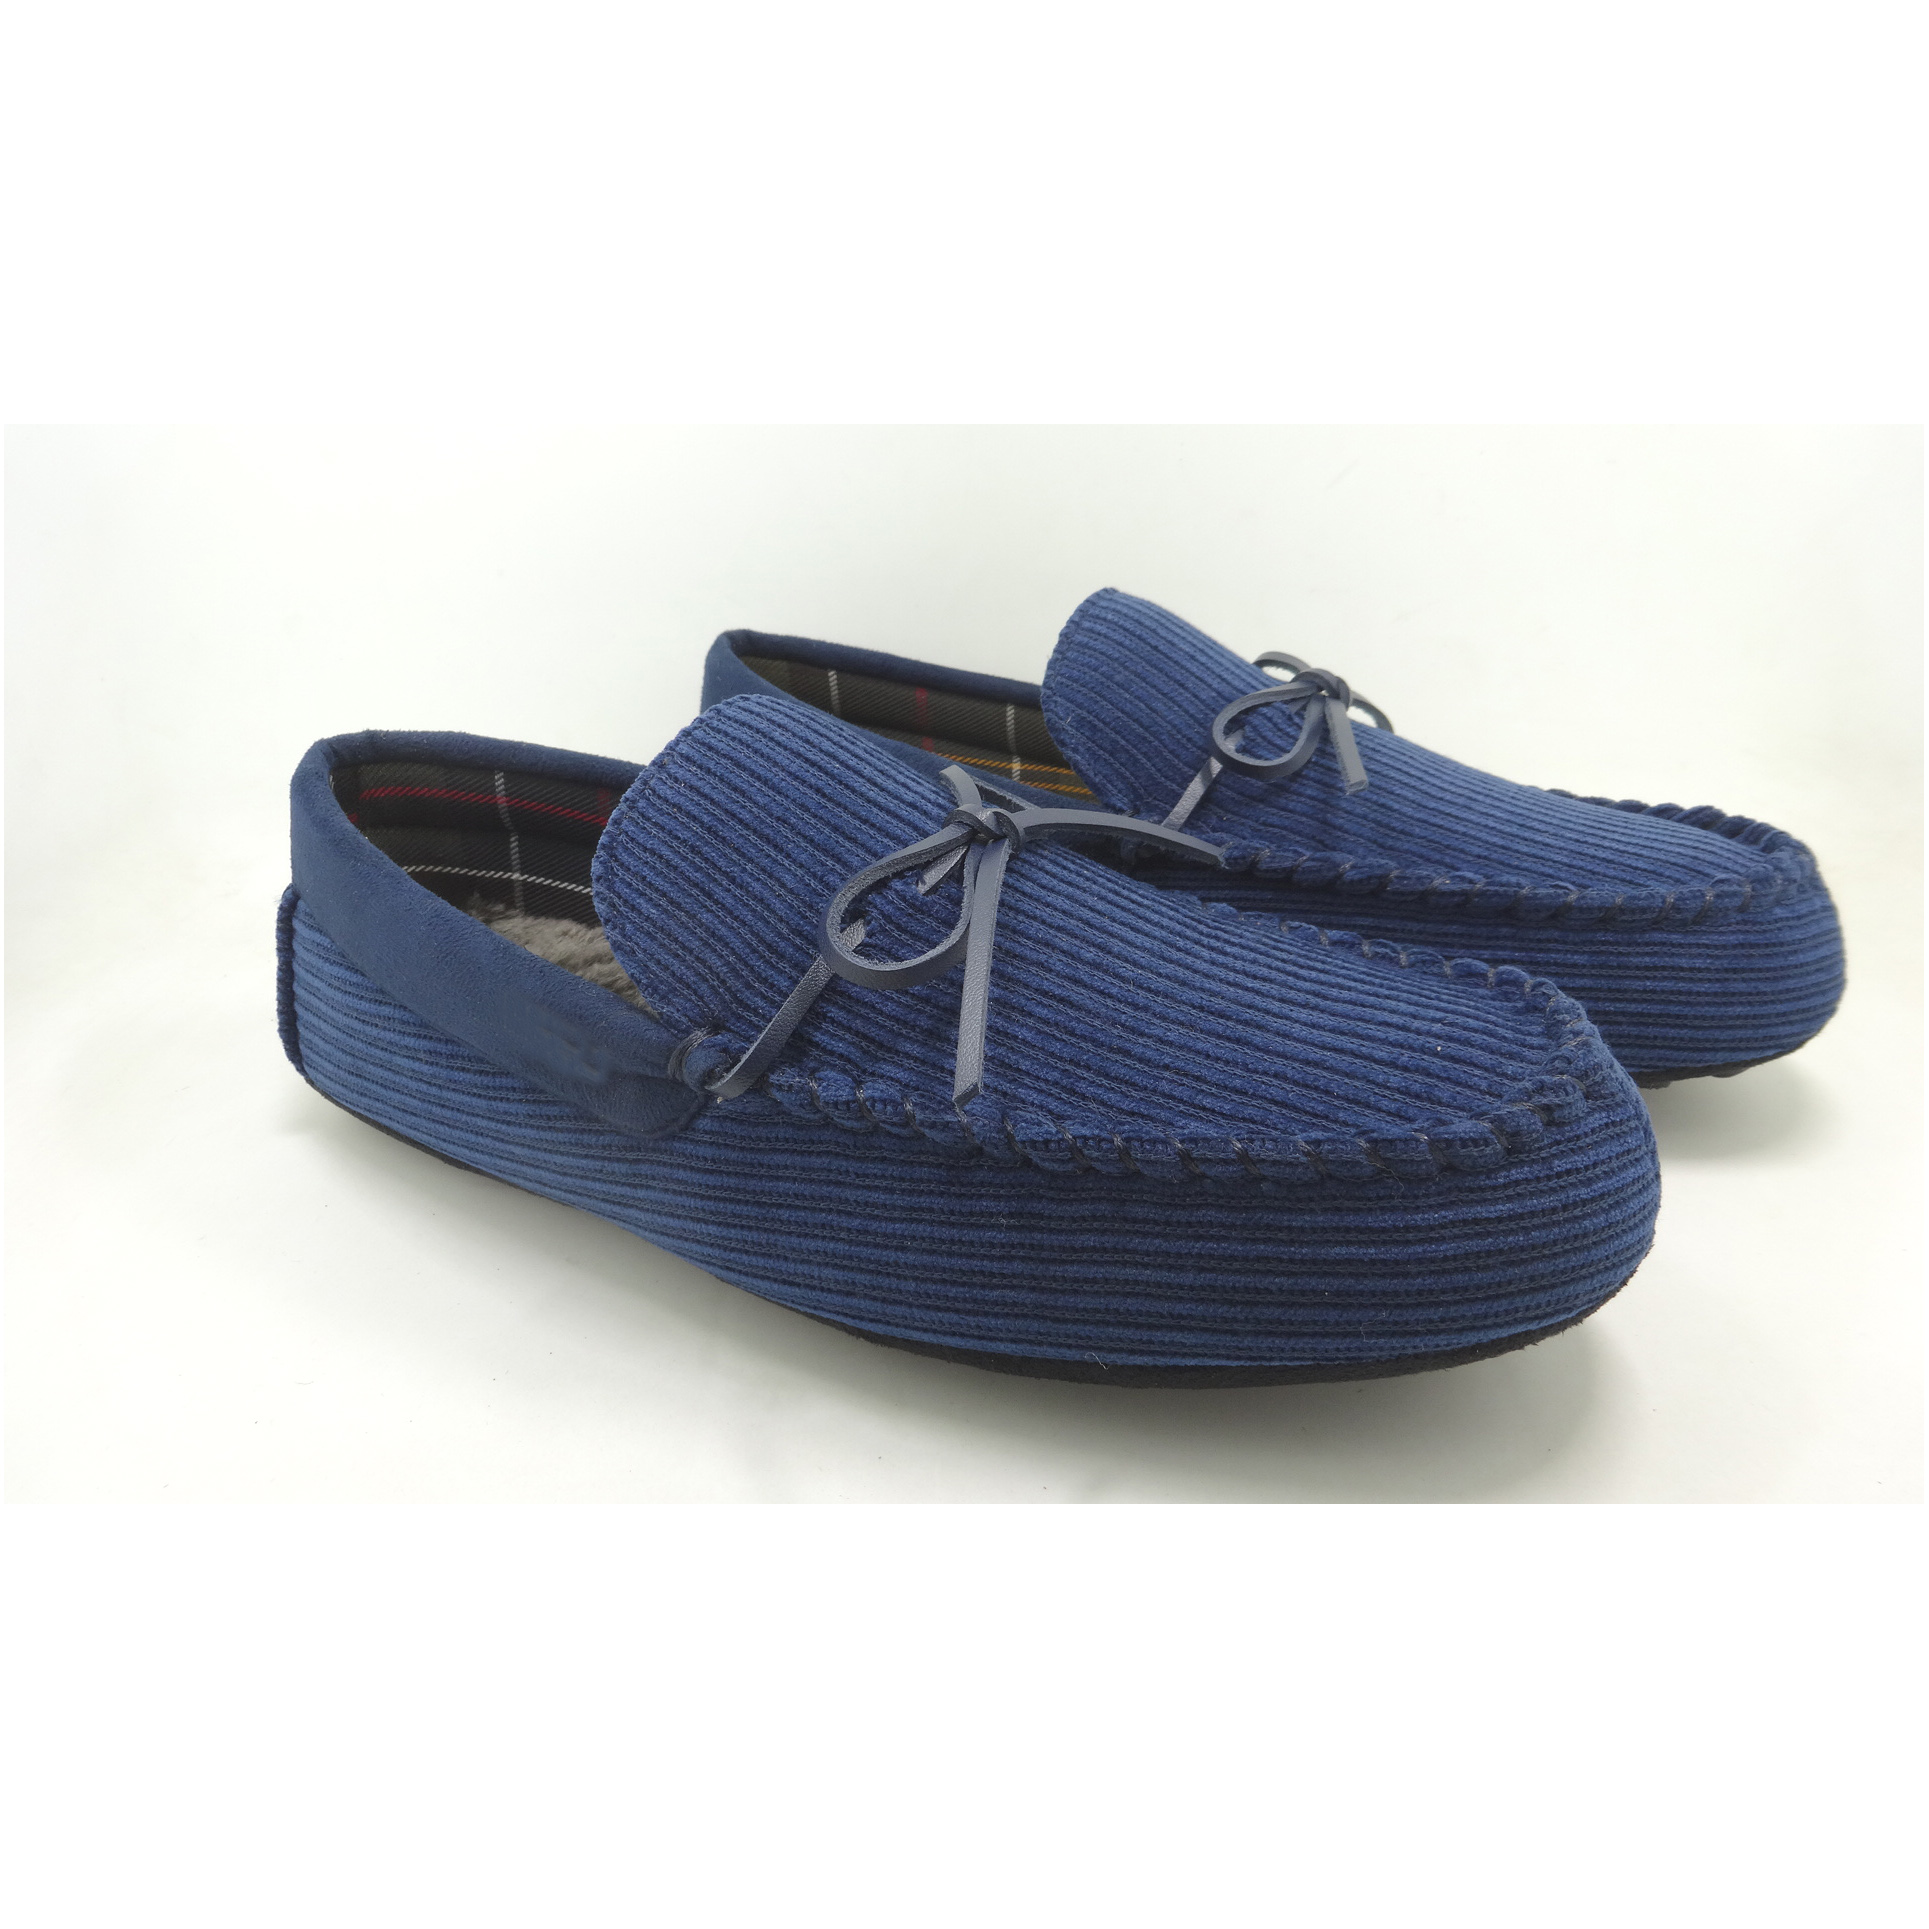 Men's Chenille Moccasin Slippers Indoor Outdoor Bedroom Slippers Chenille Slip On House Shoes 